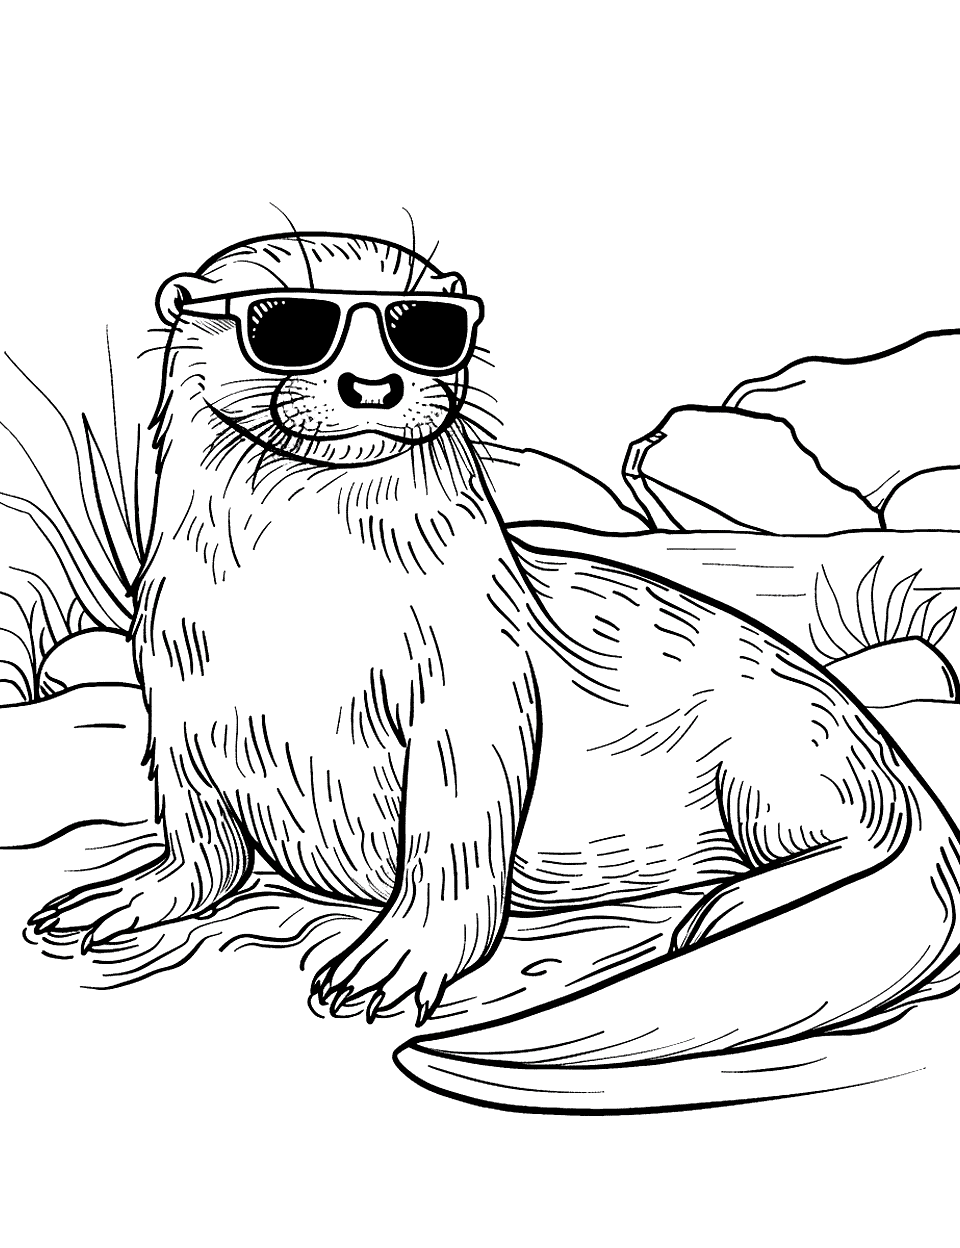 Otter with Sunglasses Coloring Page - A cool otter wearing sunglasses, lounging on a sunny beach.